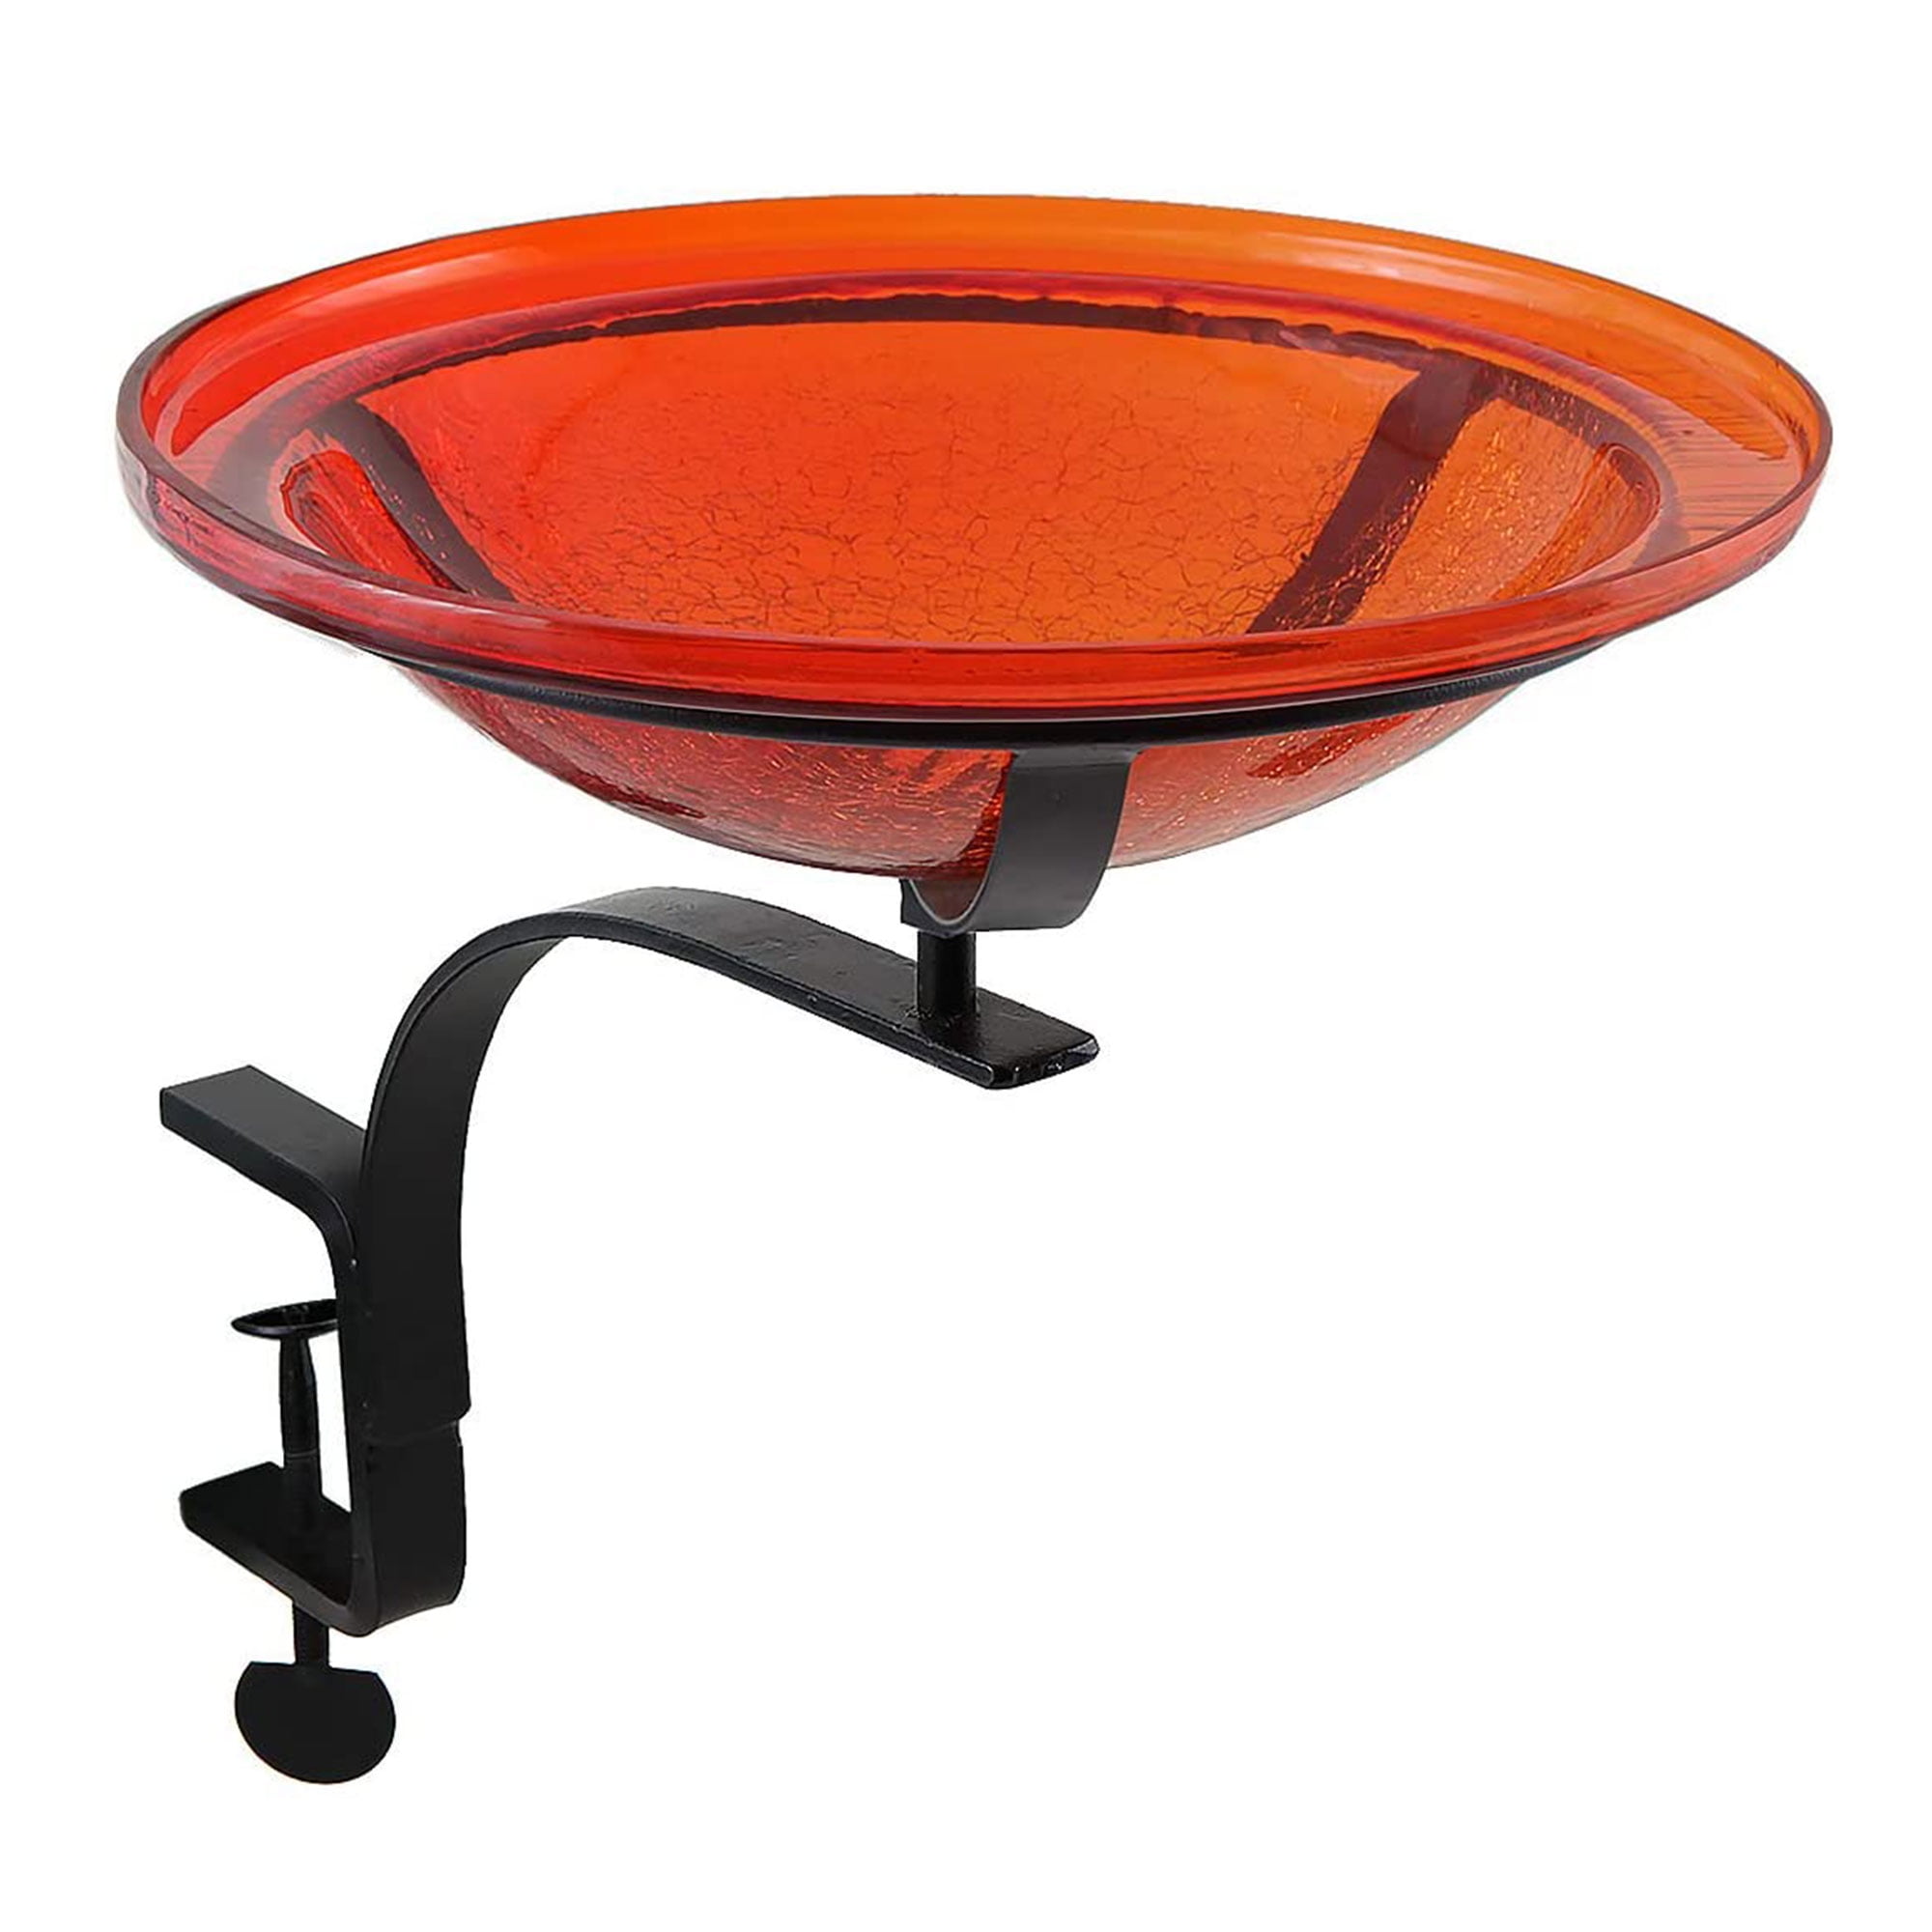 Picture of Achla CGB-09R-RM 12 in. Red Crackle Birdbath with Rail Mount Bracket